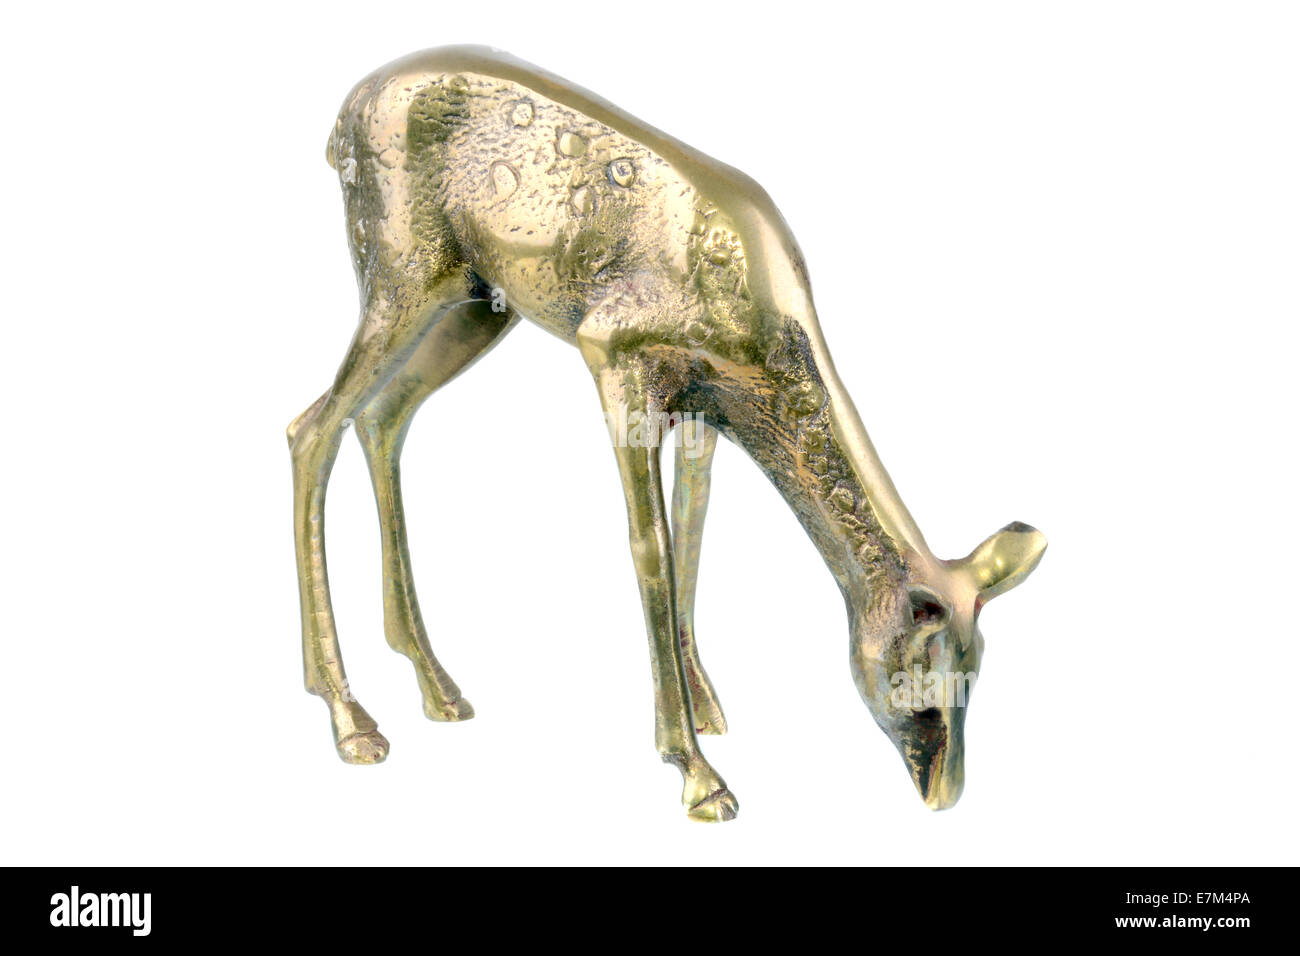 Bronze deer doe figurine isolated on a white background Stock Photo